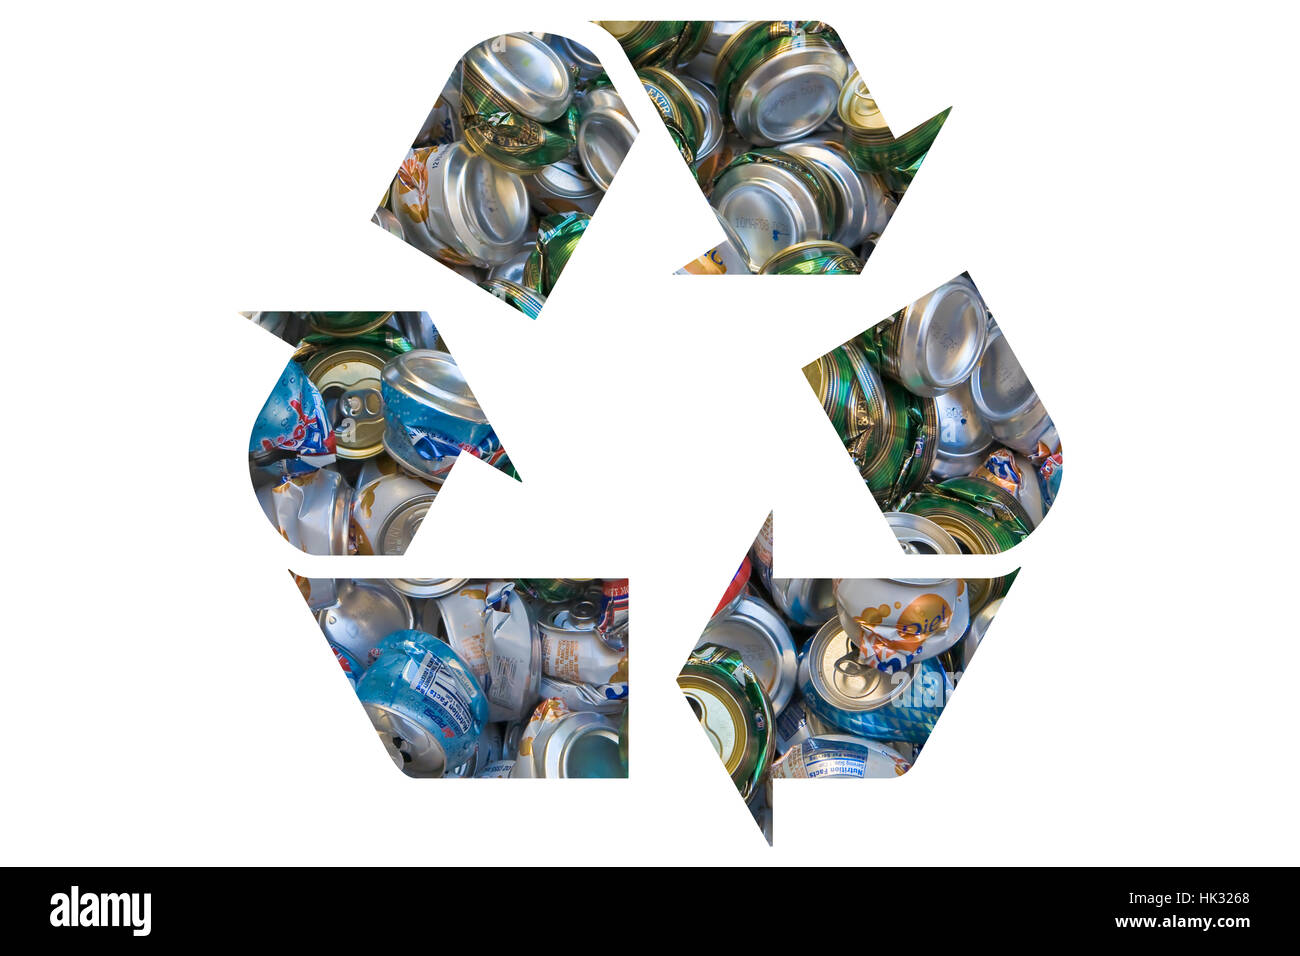 recycle symbol of crushed soda cans Stock Photo